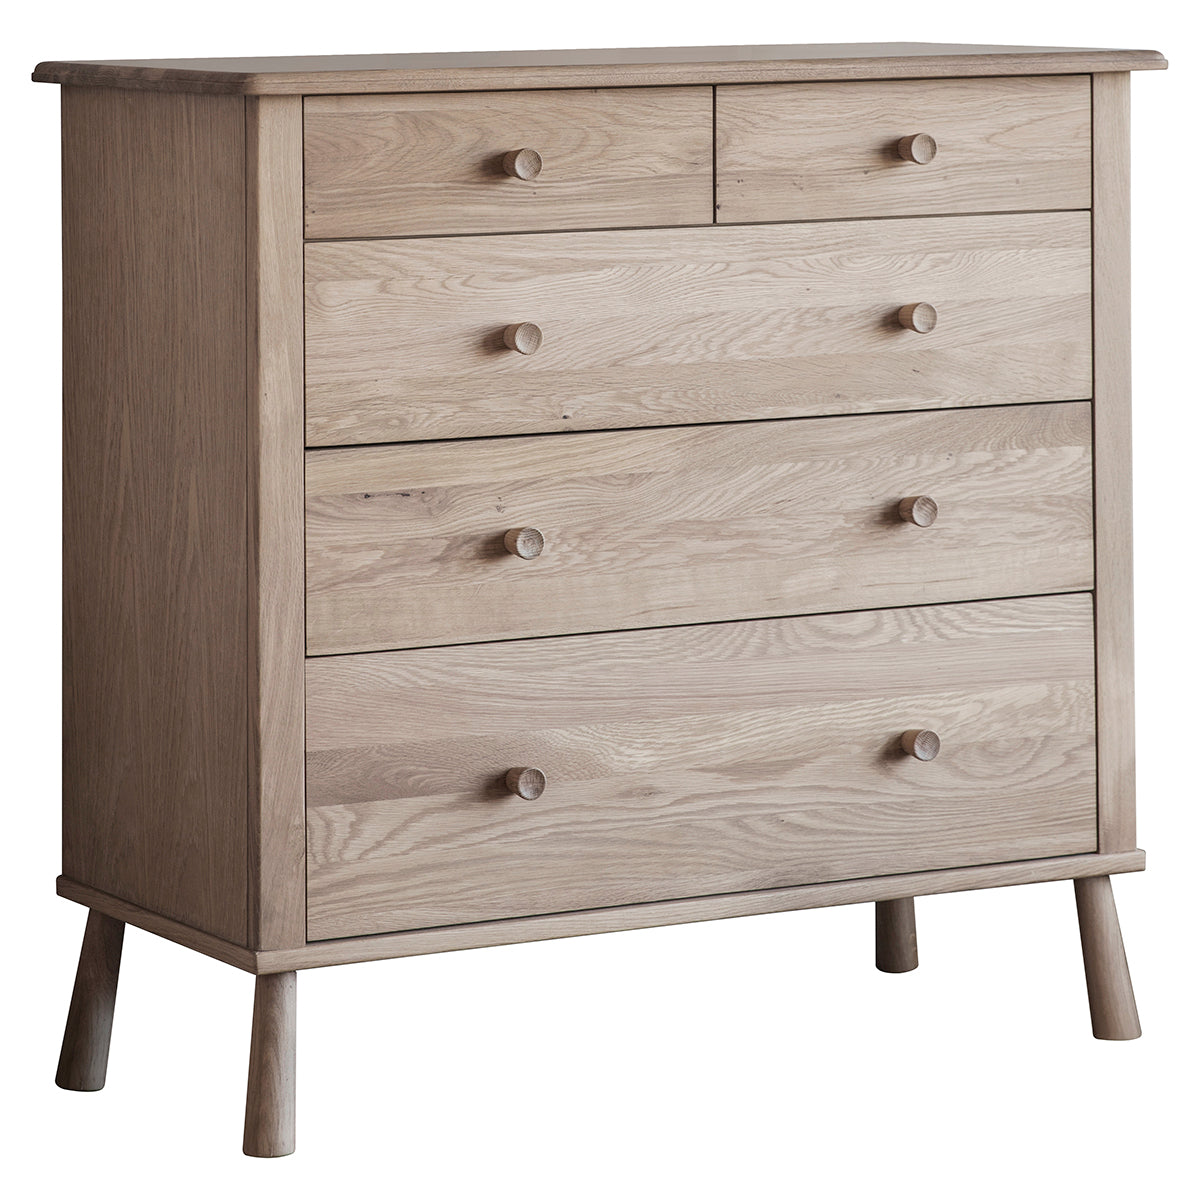 An elegant home furniture piece, the Tigley 5 Drawer Chest 980x450x954mm by Kikiathome.co.uk is perfect for interior decor.